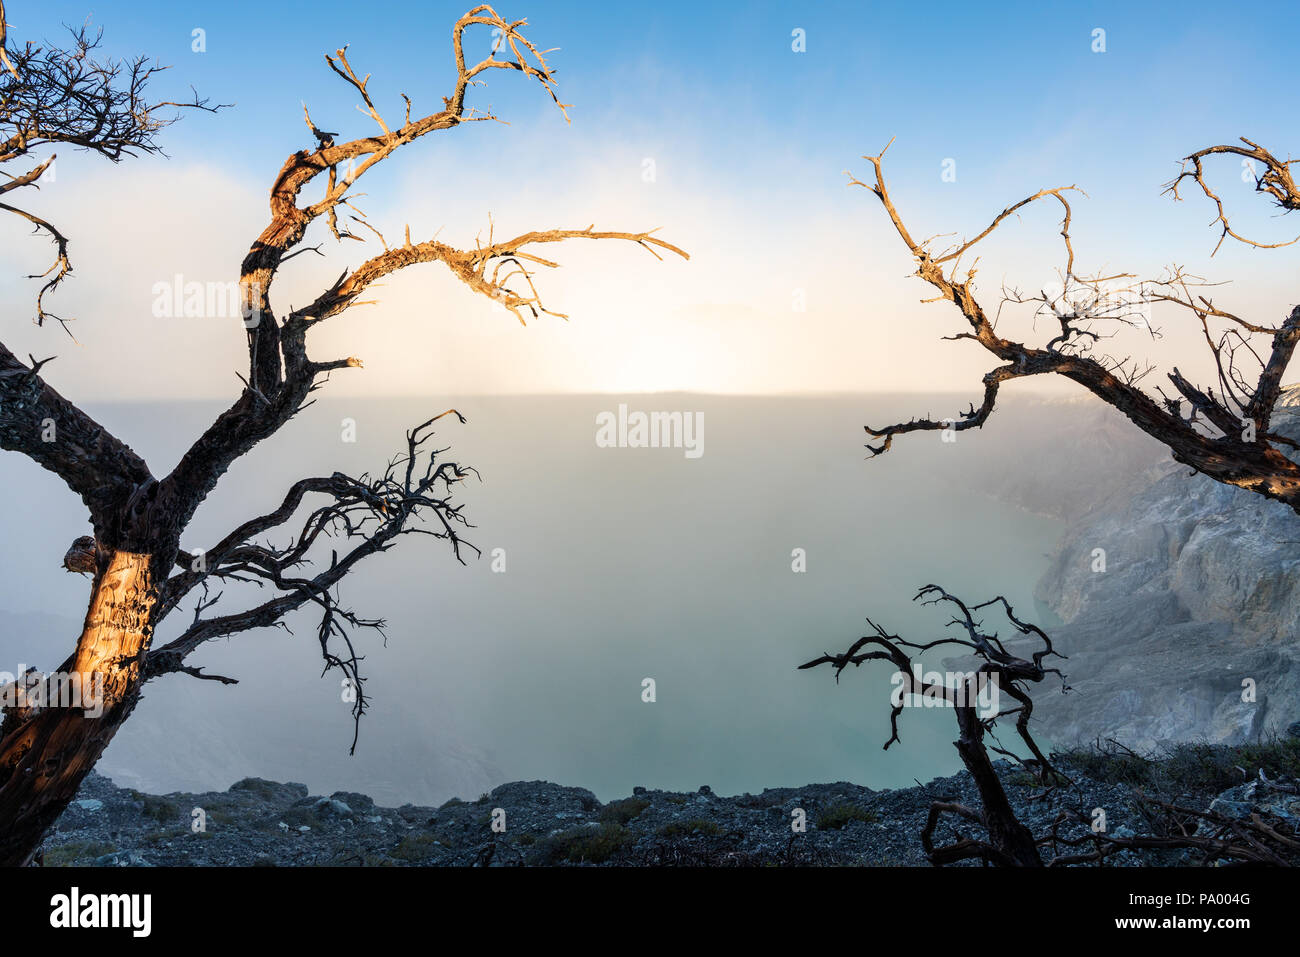 Dead trees and smoke with lake on Kawah Ijen volcanic, famous travel destination and tourist attraction in Indonesia Stock Photo